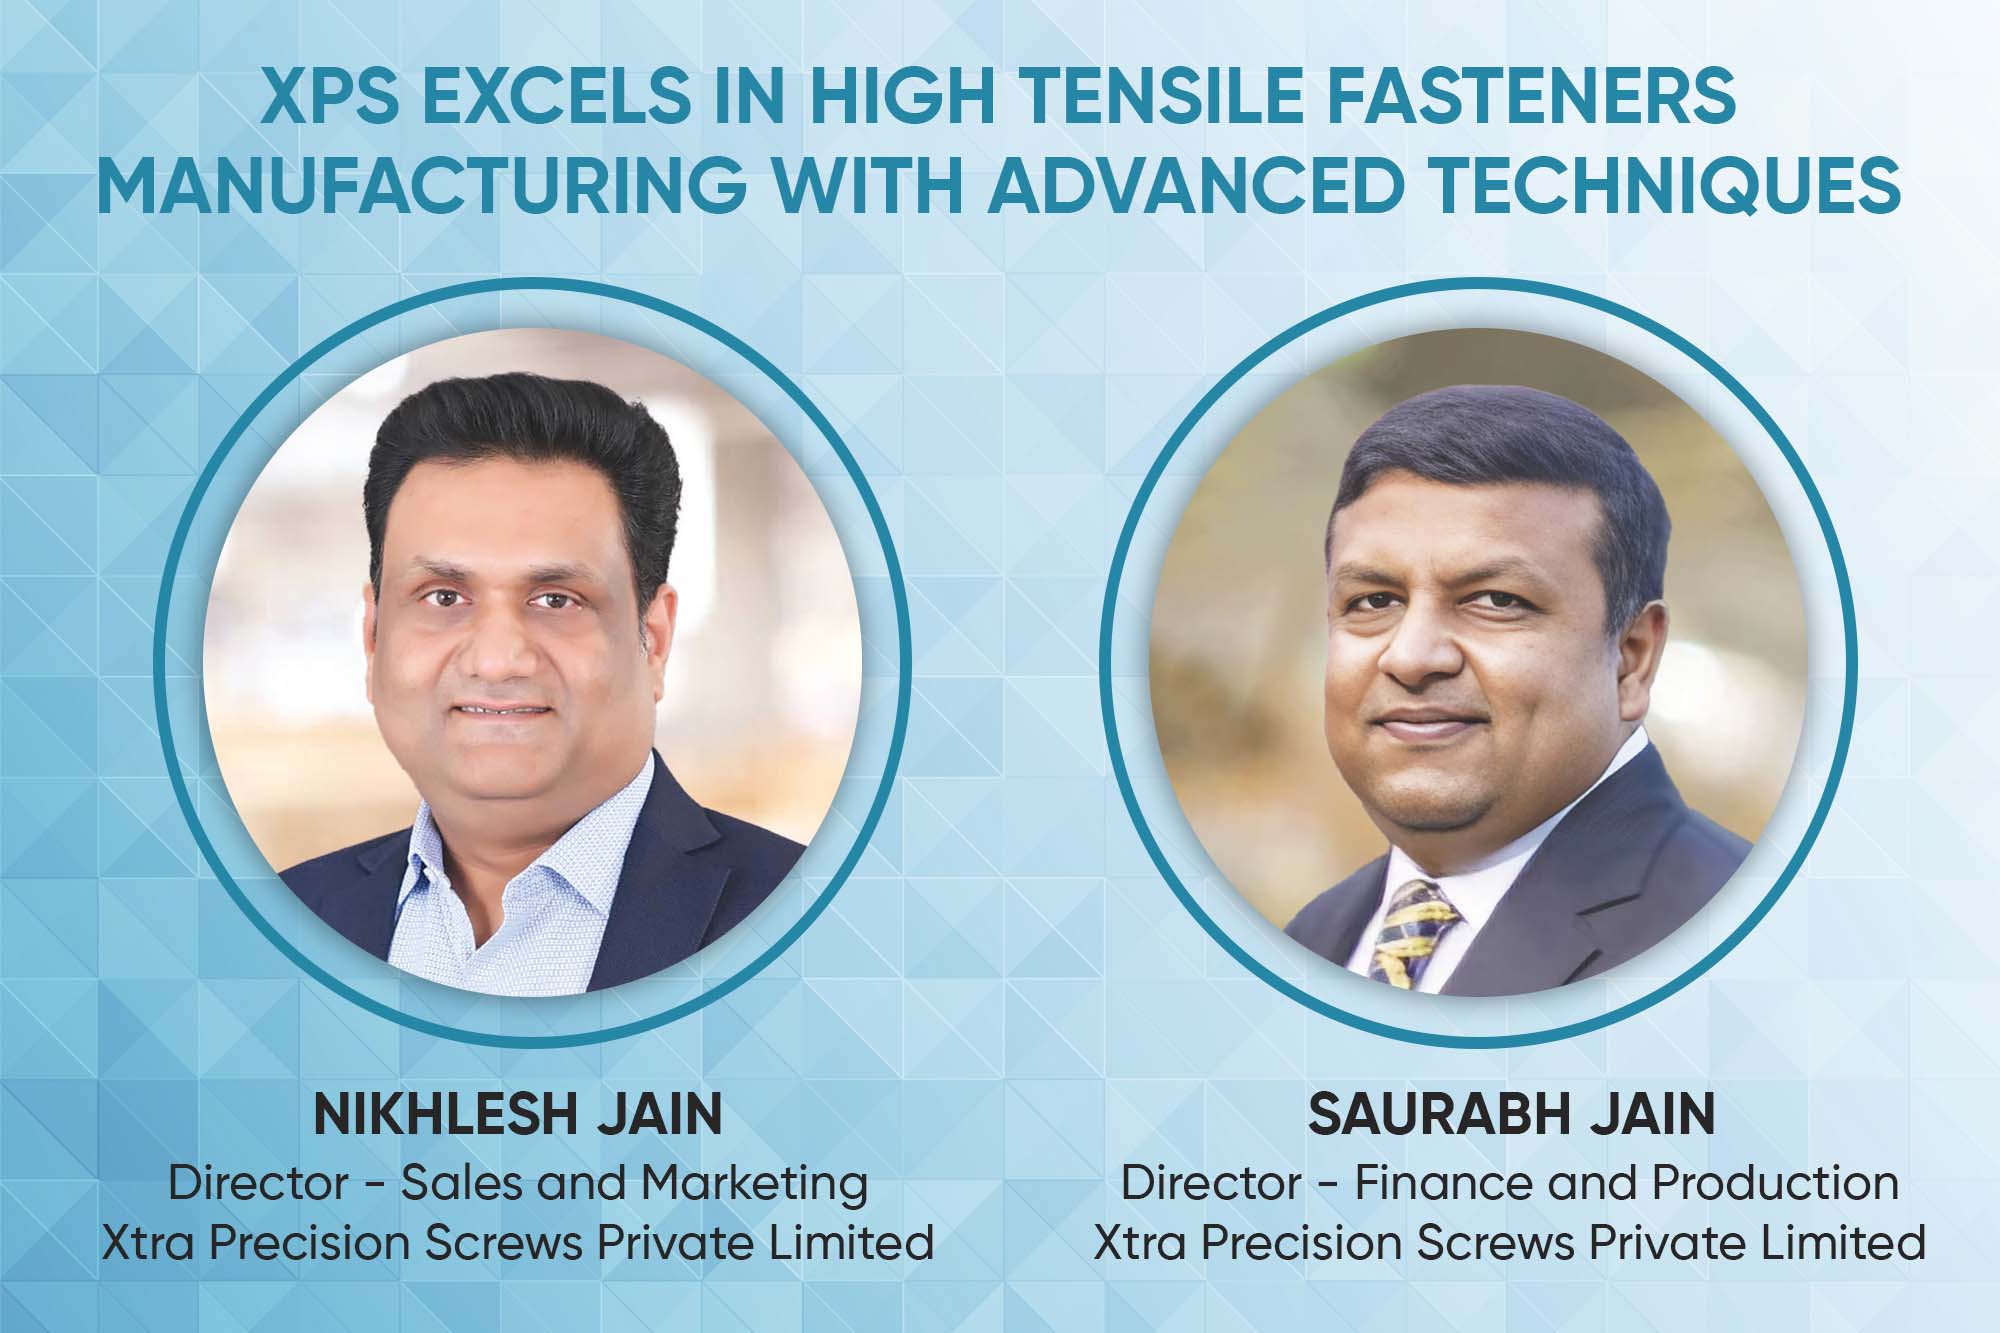 XPS excels in high tensile fasteners manufacturing with advanced techniques